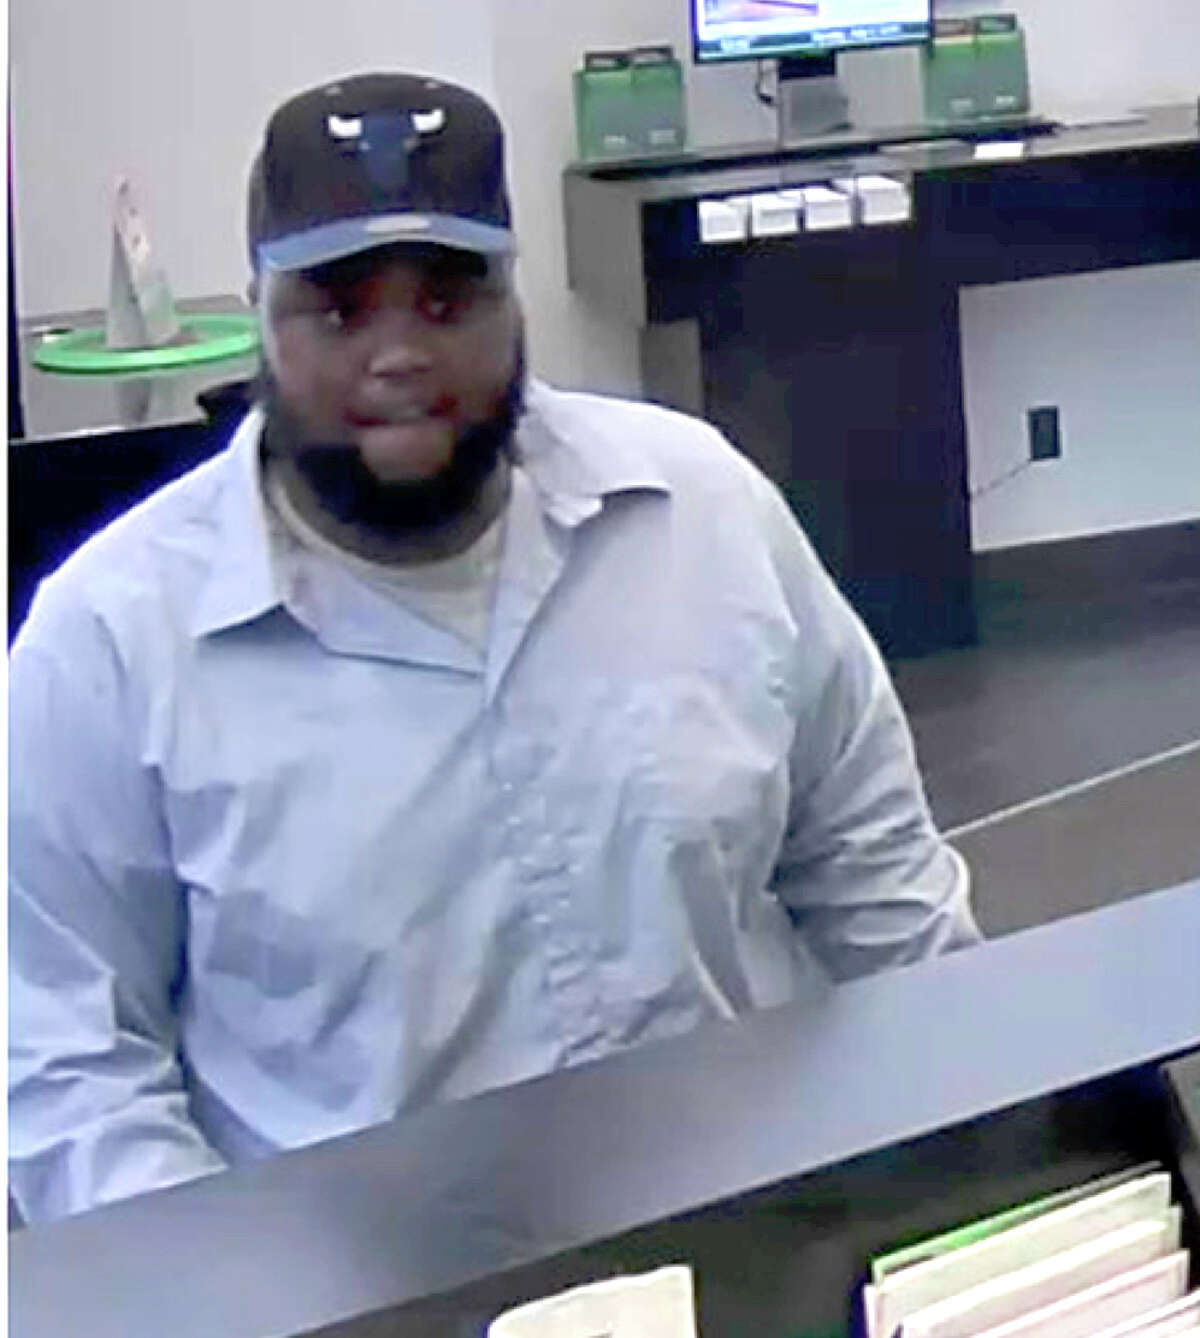 Police say this man robbed the Post Road East TD Bank. The suspect was described as a black male, approximately 6’1” tall with a heavy build and scruffy beard, wearing a Chicago Bulls baseball cap. Anyone who recognizes the suspect or has information is urged to call the Westport Detective Bureau at 203-341-6080.